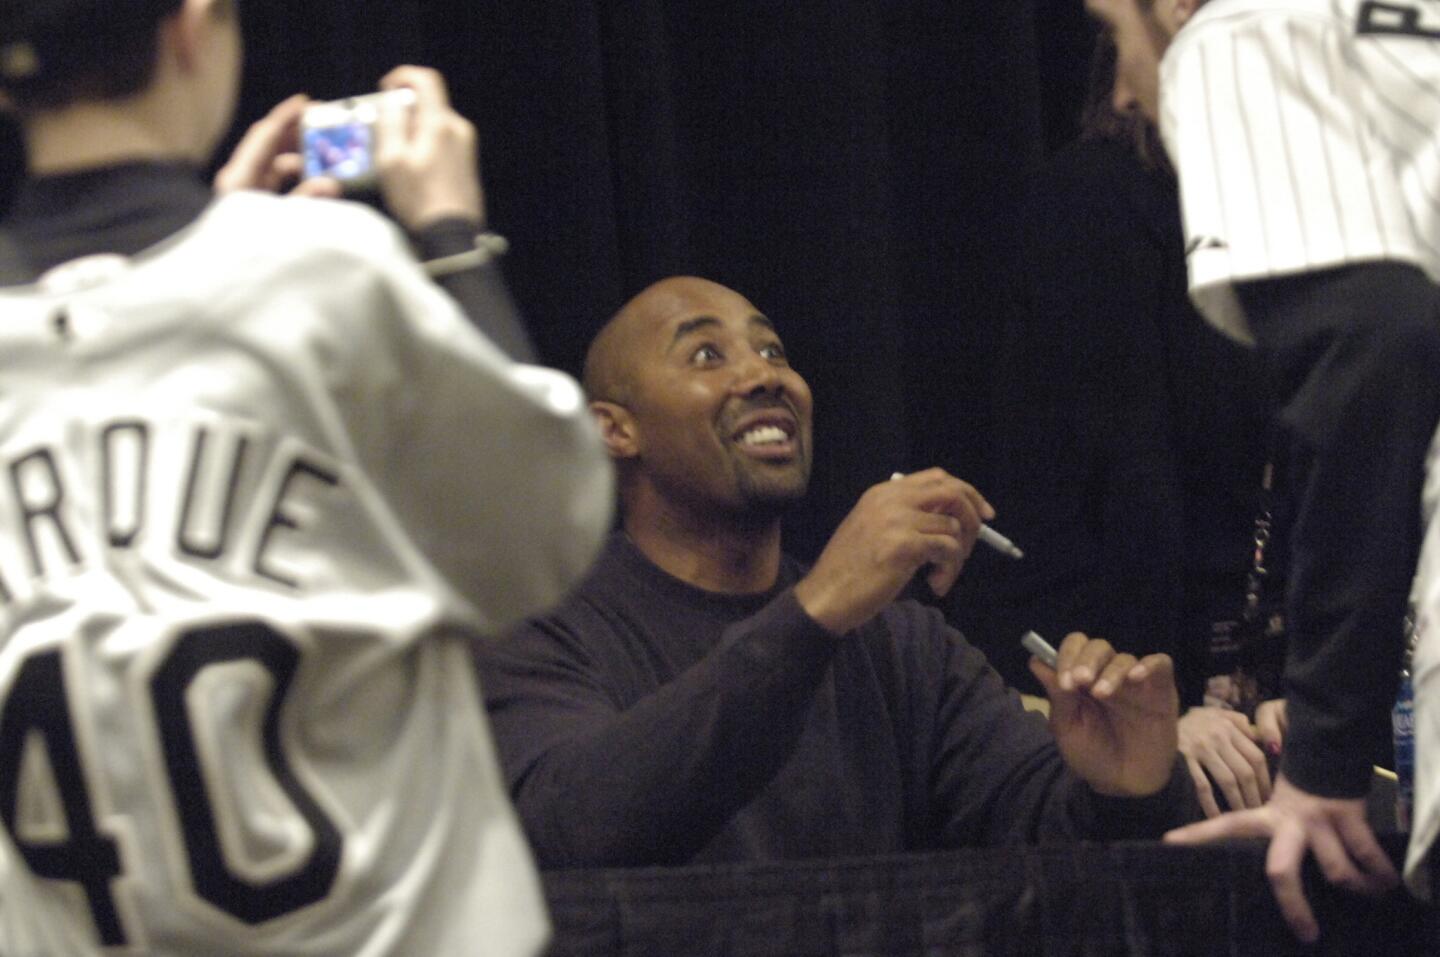 Harold Baines signs autographs at SoxFest on Jan. 28, 2006.